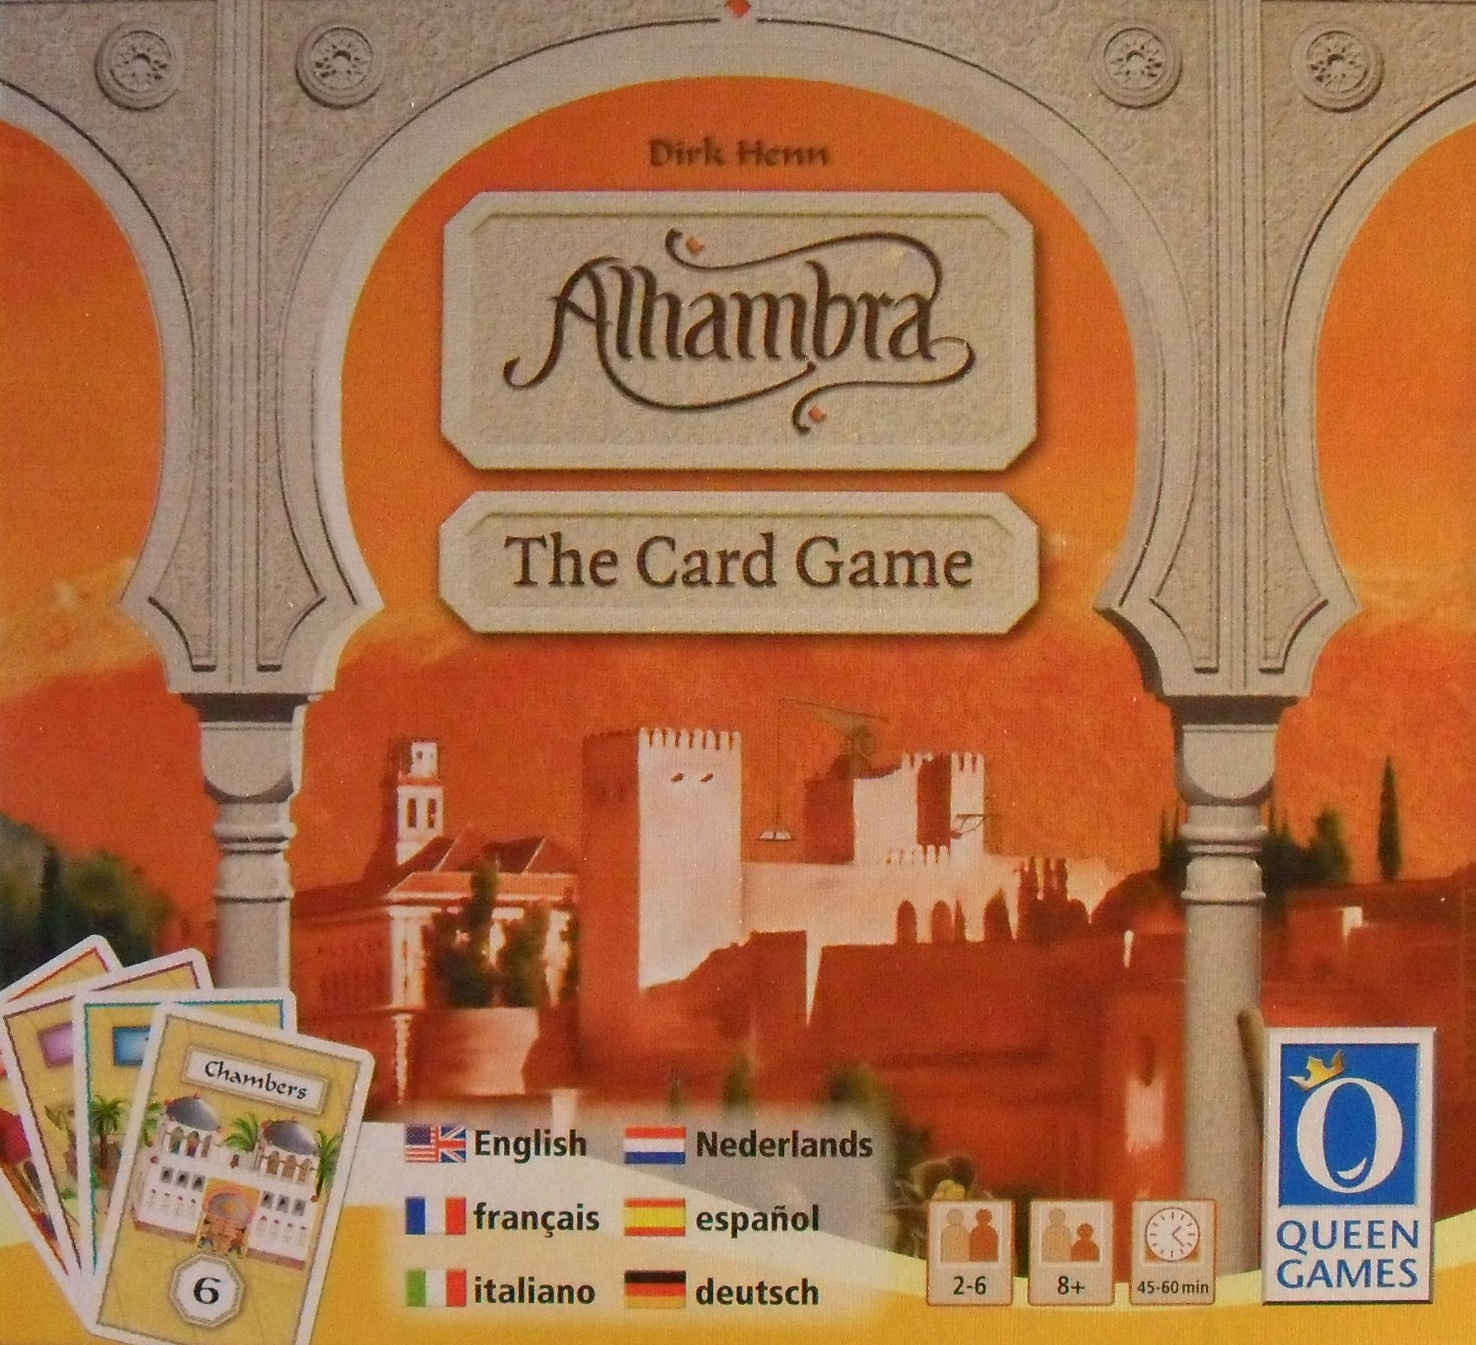 Alhambra: The Card Game